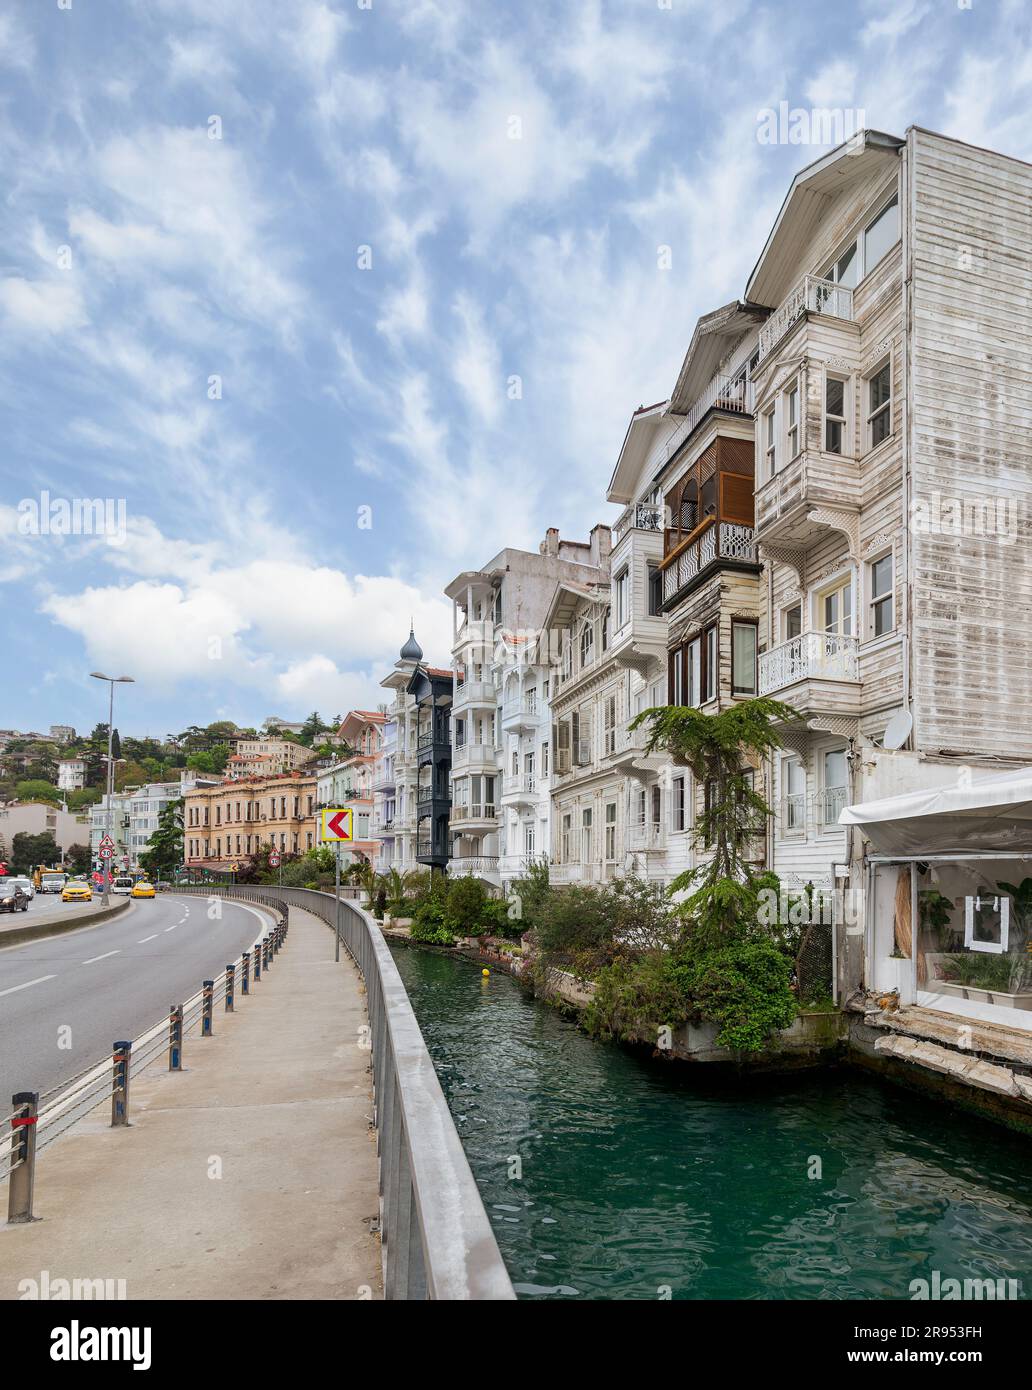 Wooden traditional residential buildings by a narrow water canal near Bosphorus strait, in Arnavutkoy neighborhood, Besiktas district, Istanbul, Turkiye, in a sunny spring day Stock Photo